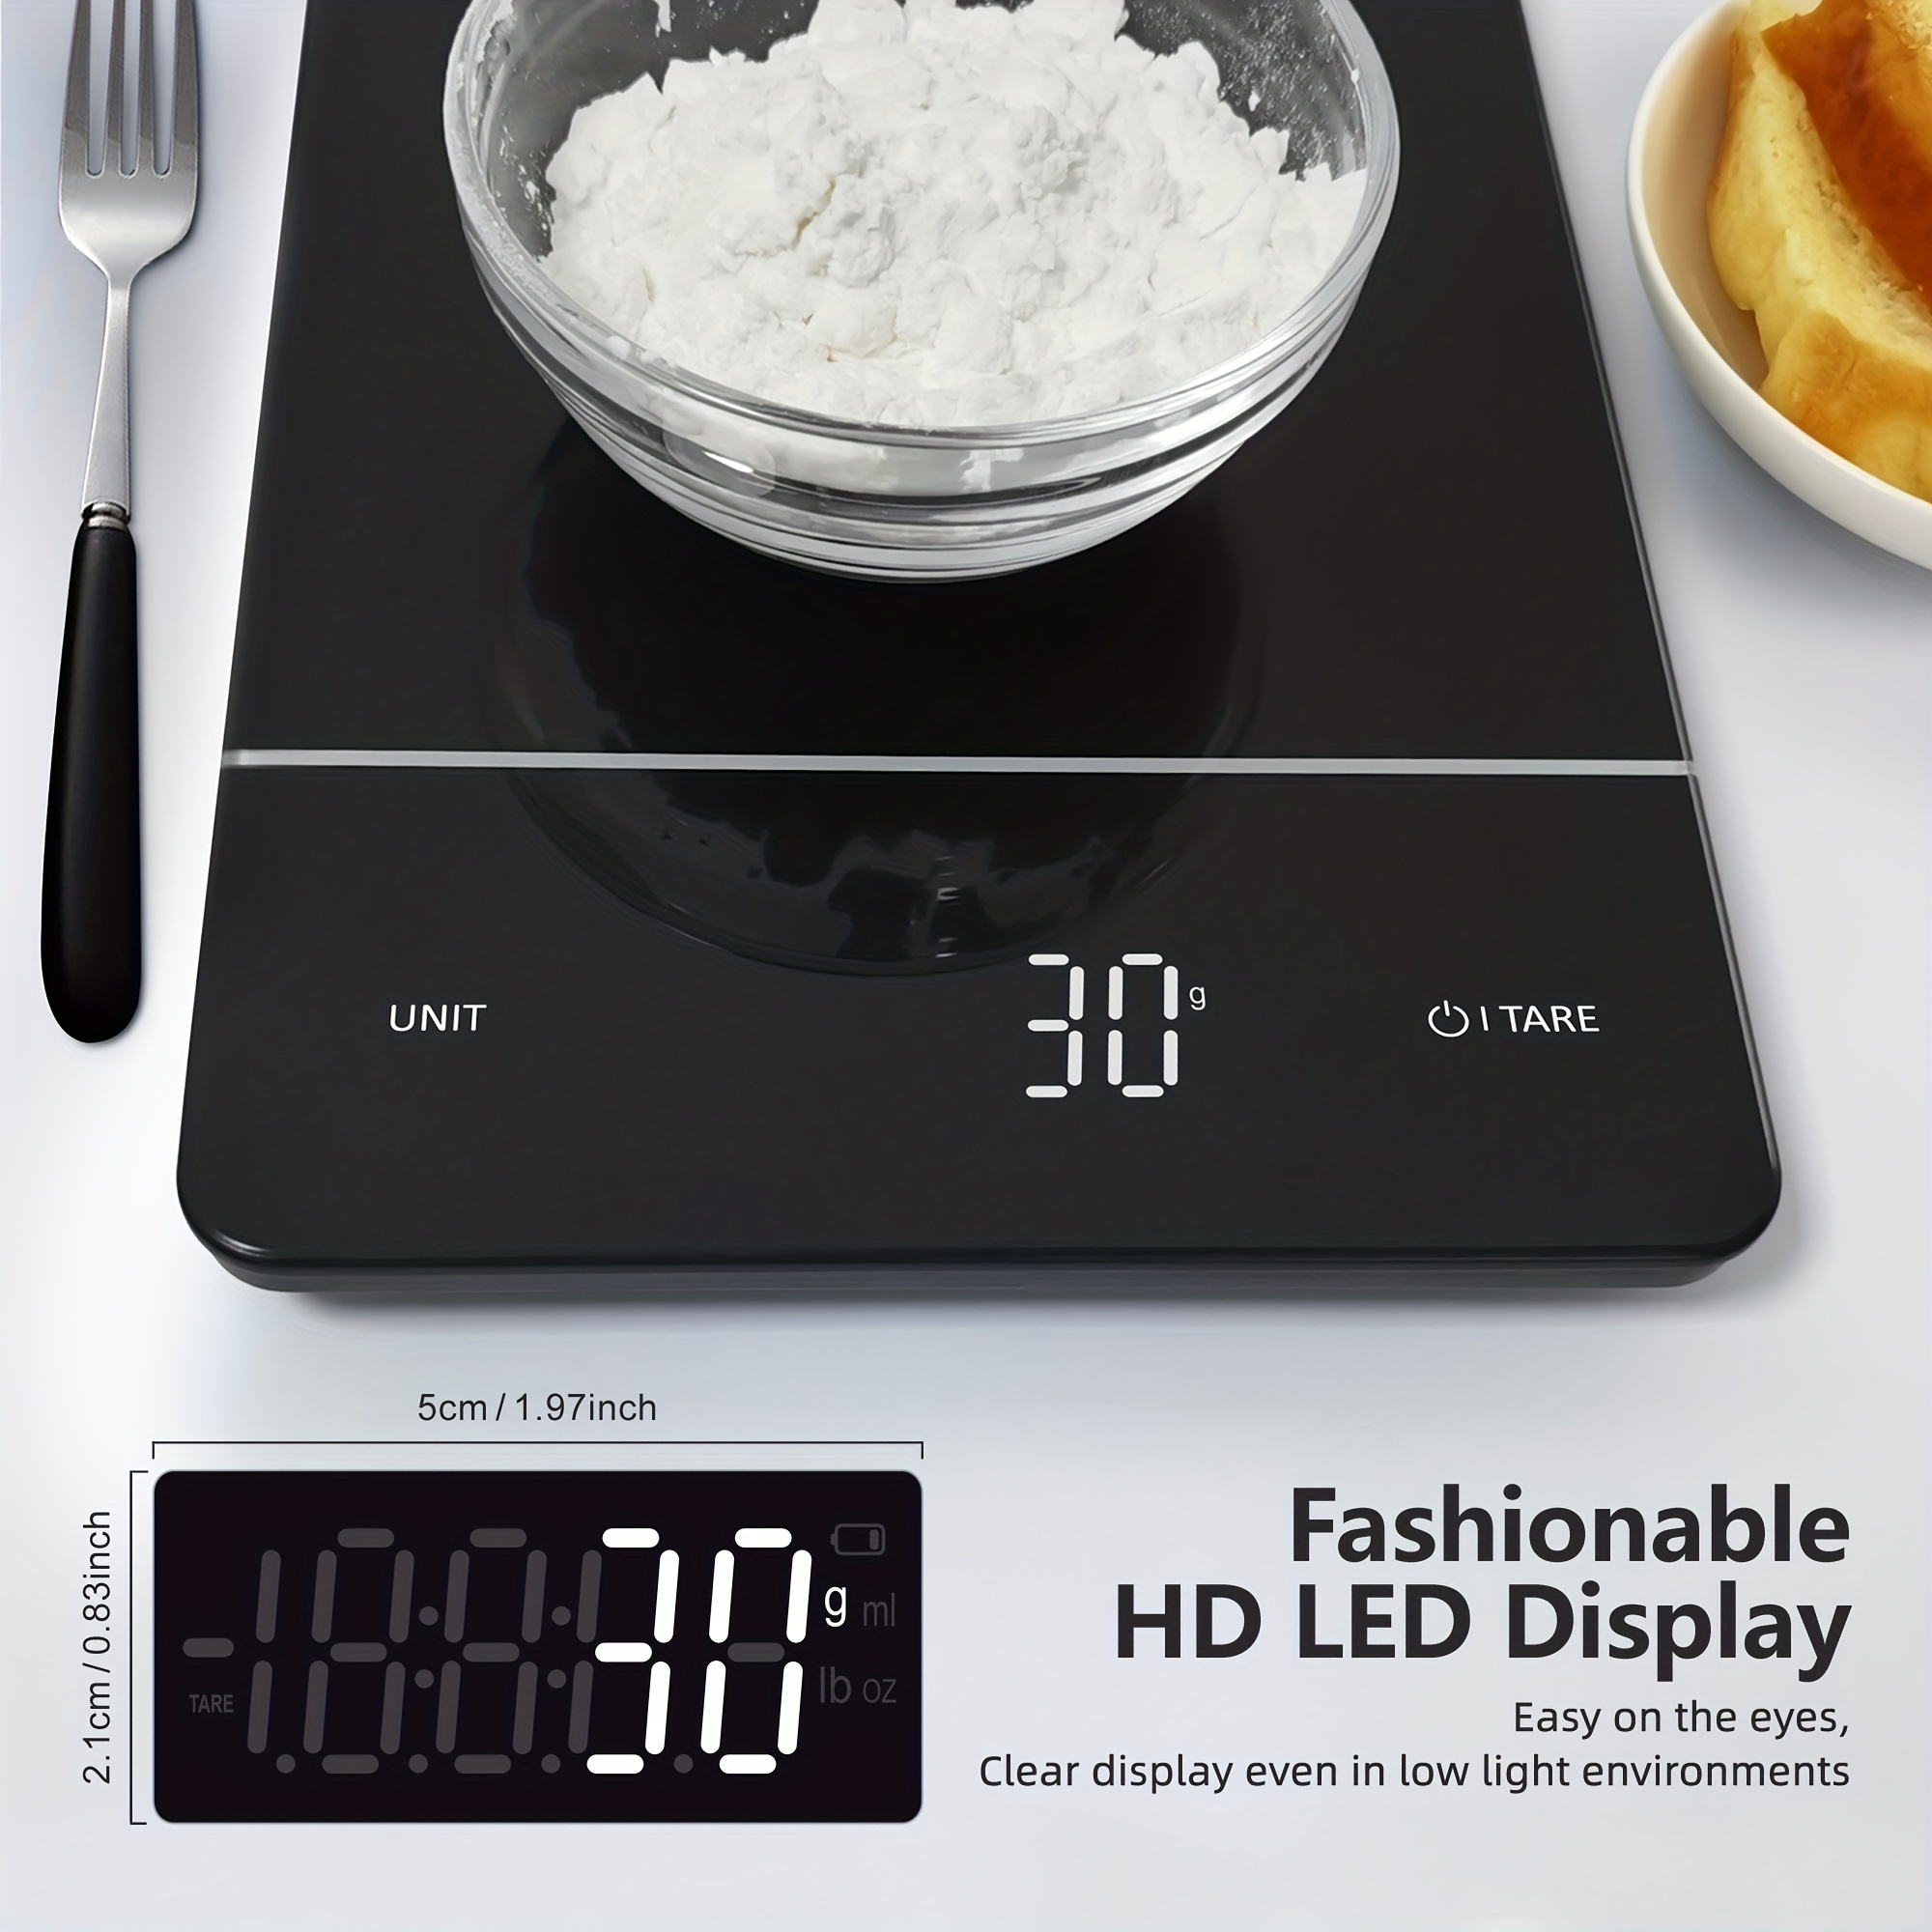 Mainstays Glass Digital Food Scale, Kitchen Scale, 0.05oz/1g Precision  Weighing